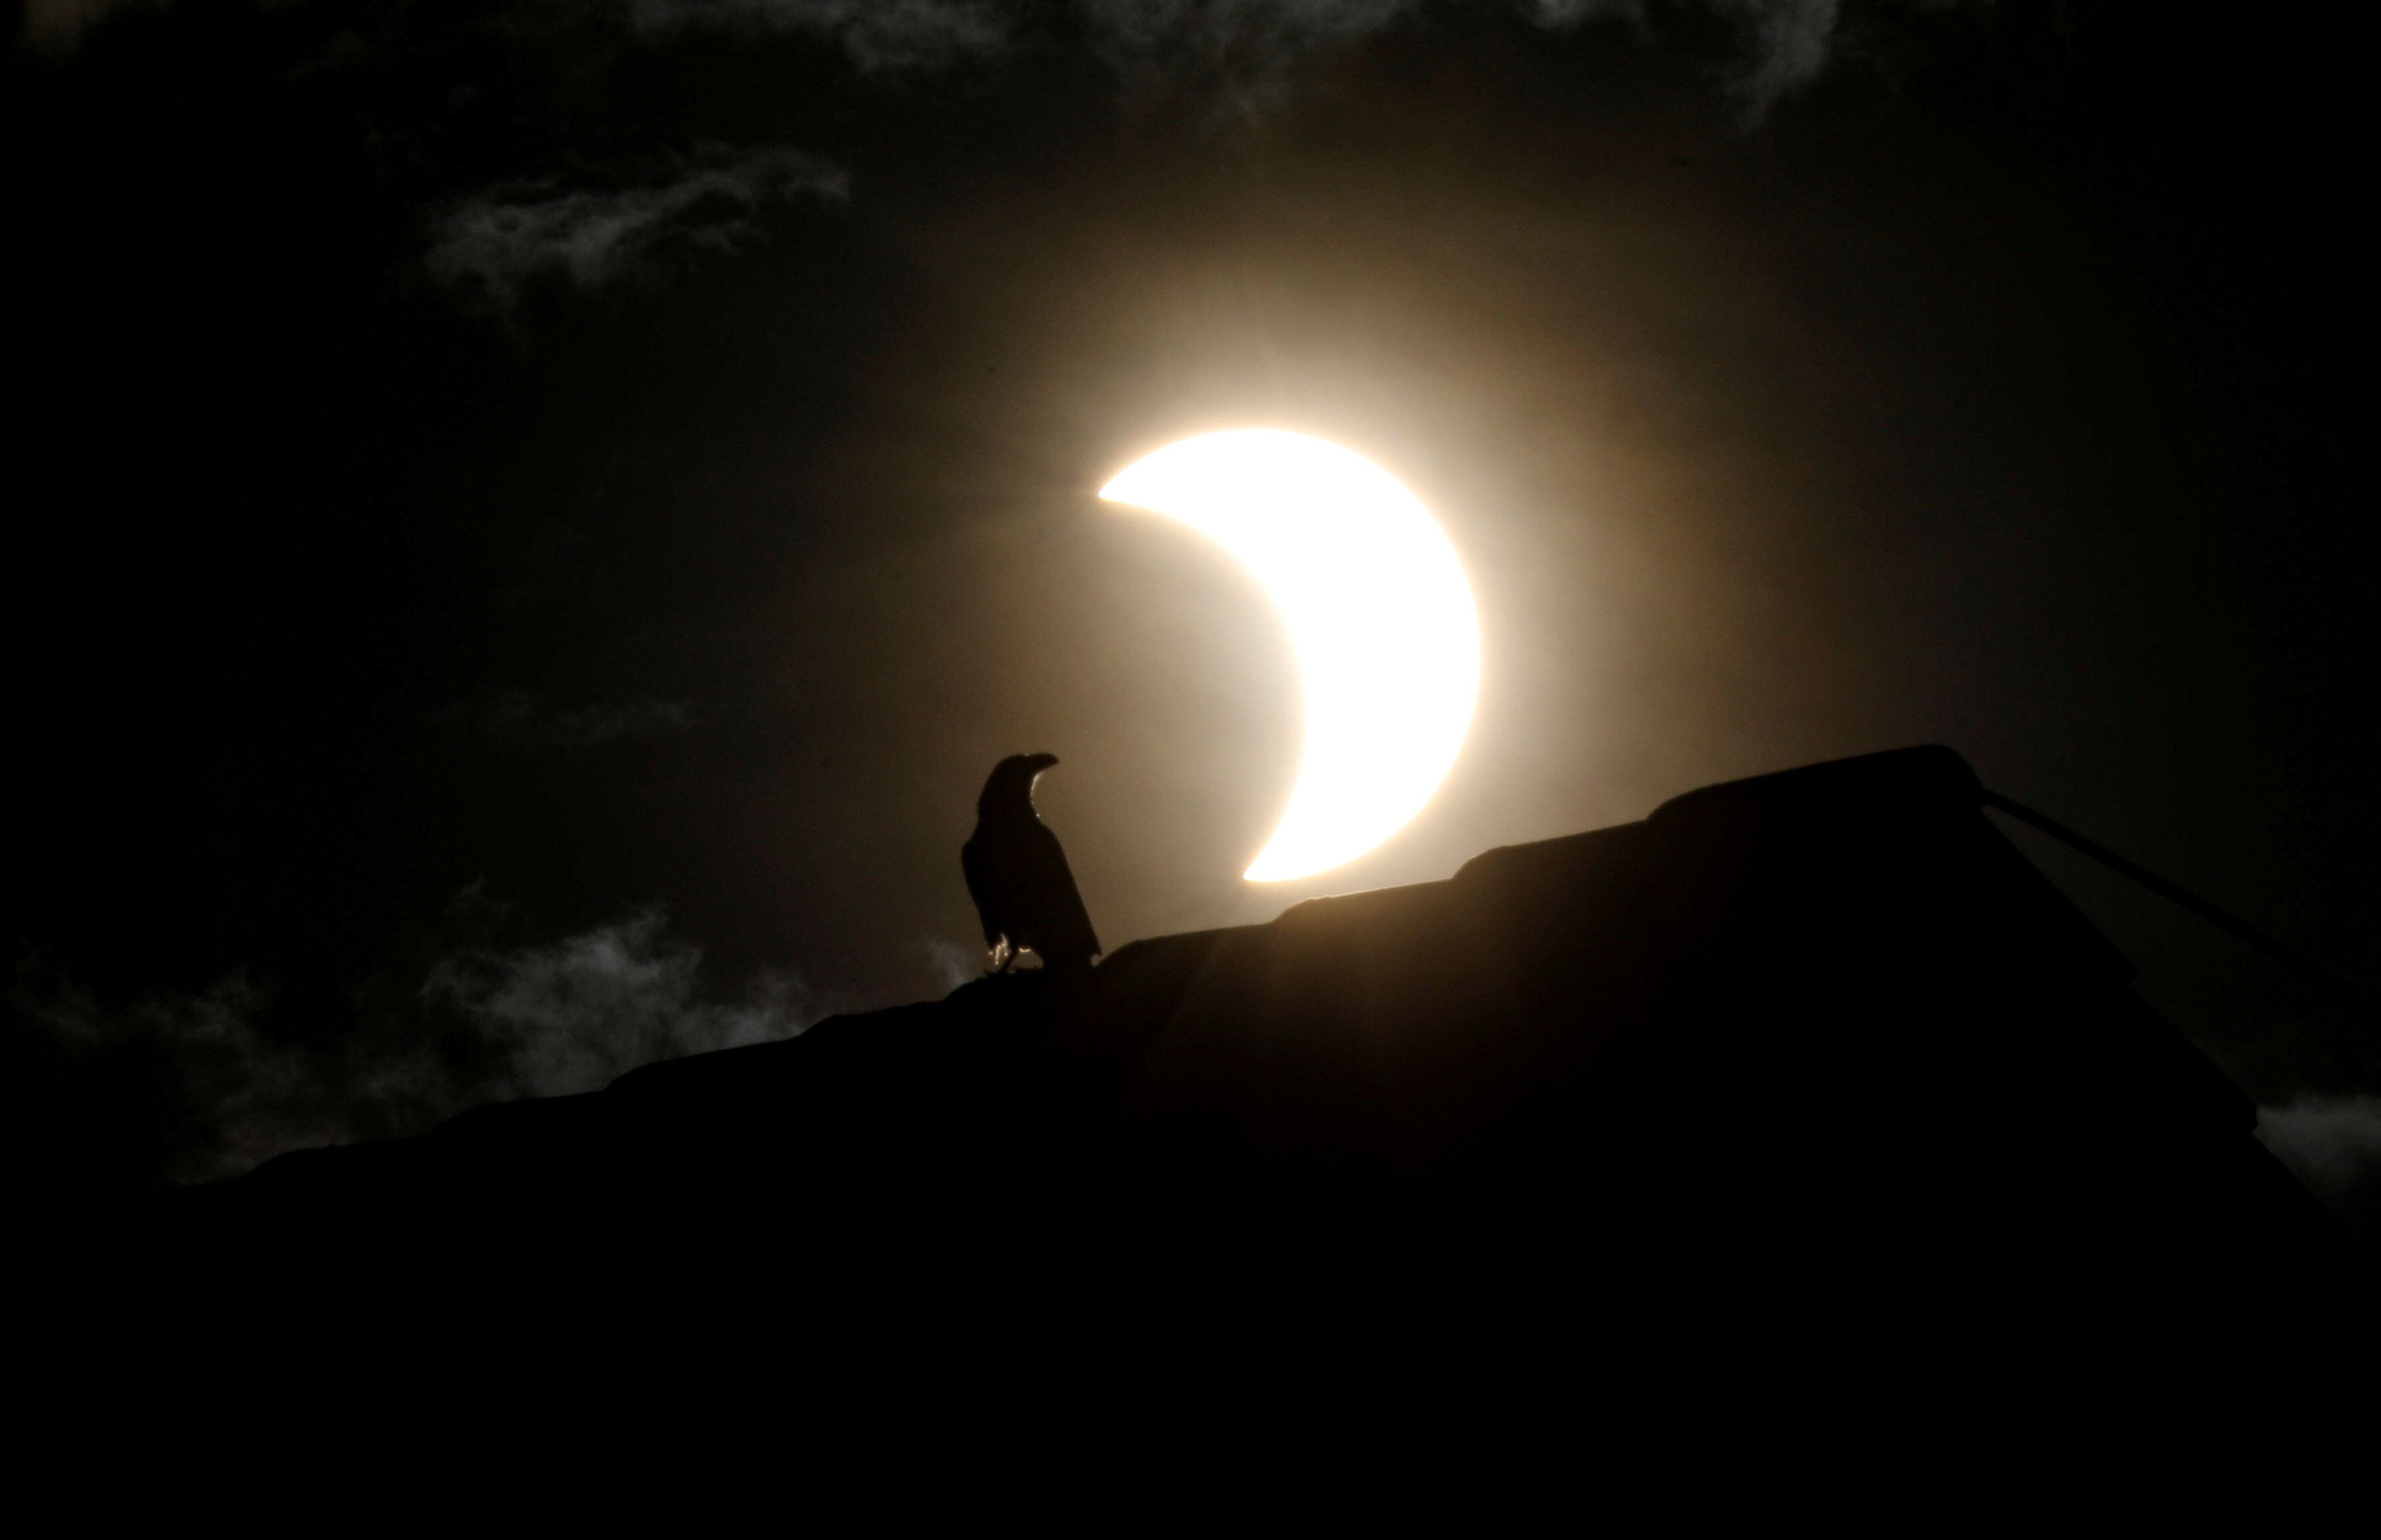 A crow stands on a roof as a partial solar eclipse is observed in Nairobi, Kenya, June 21, 2020. REUTERS/Baz Ratner     TPX IMAGES OF THE DAY